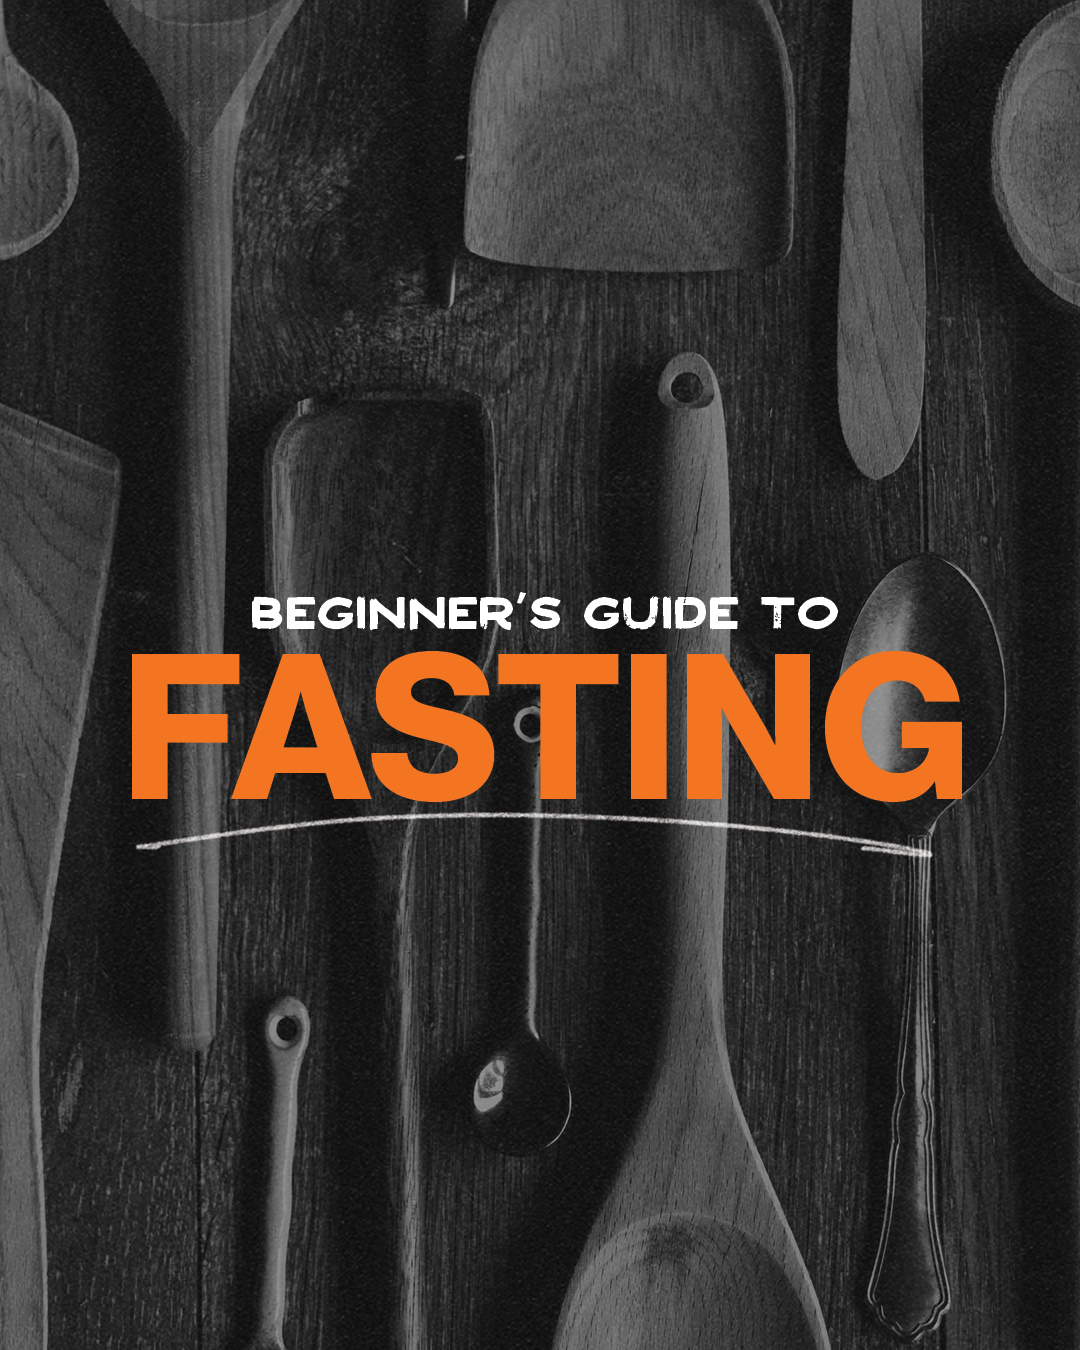 Featured Image for “Beginner’s Guide to Fasting”